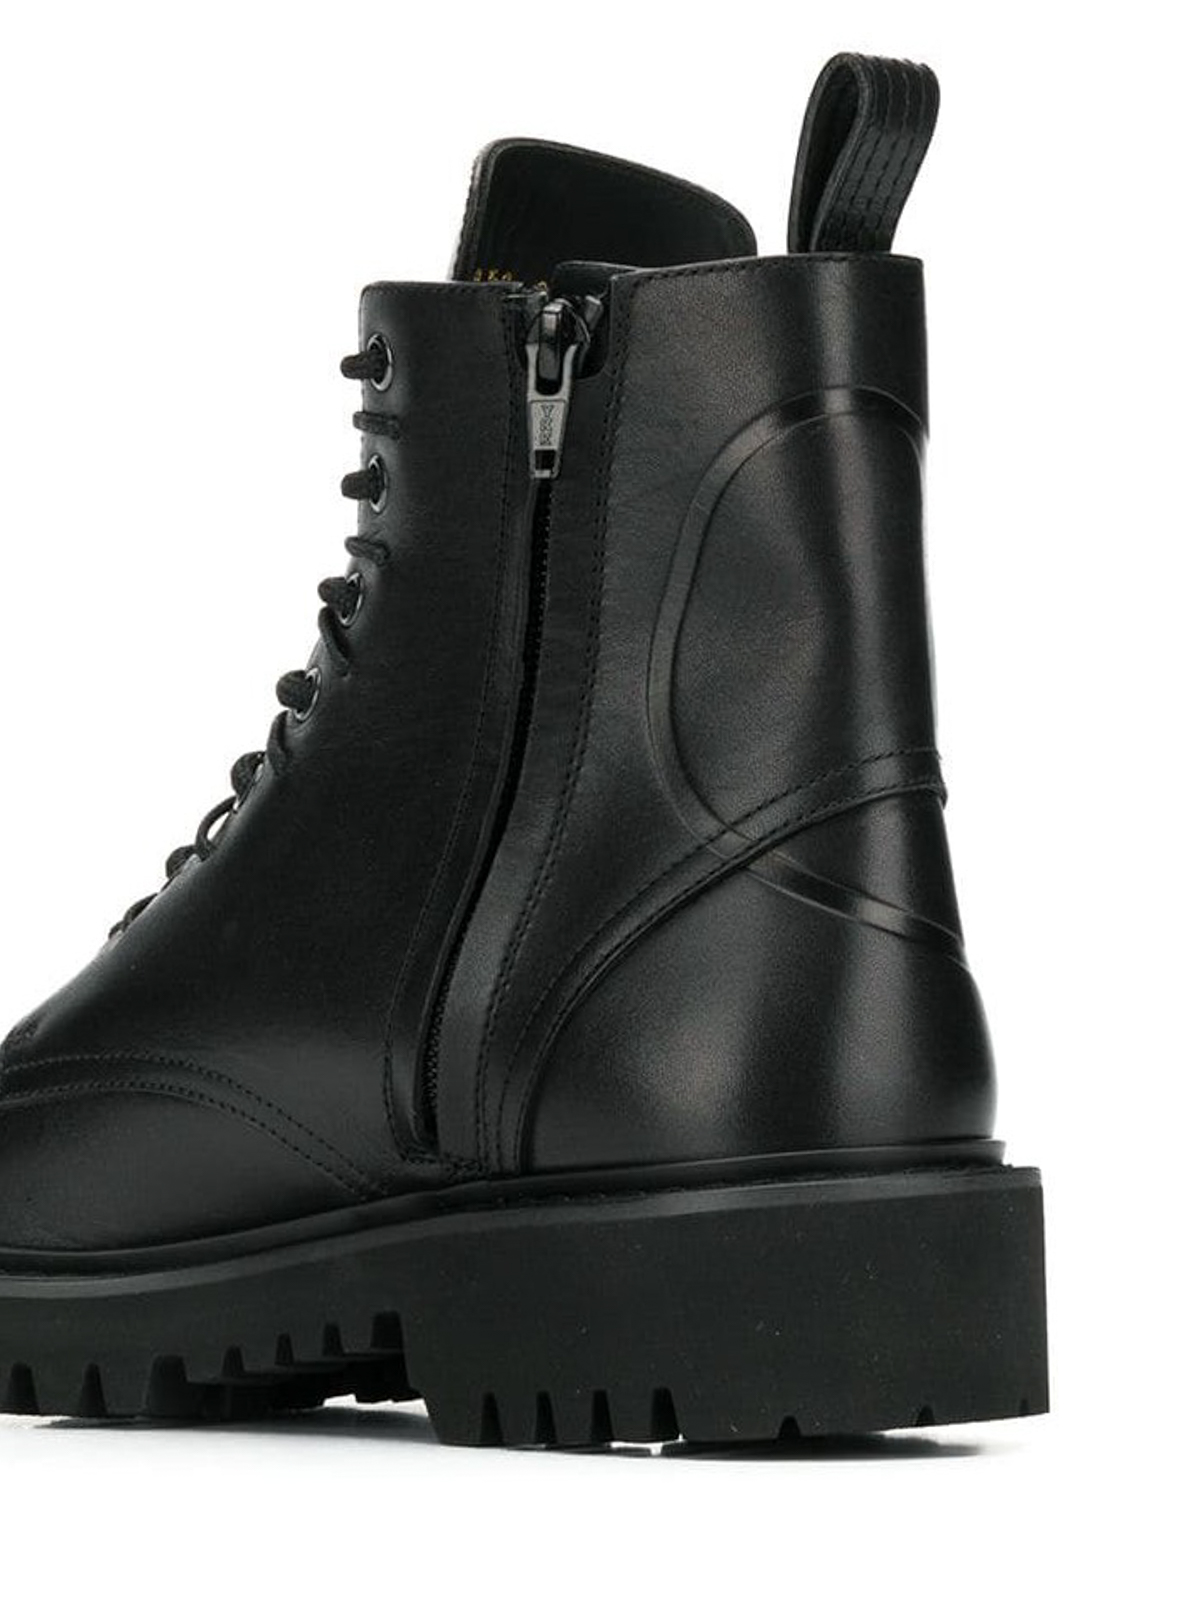 leather combat boots - ankle boots 